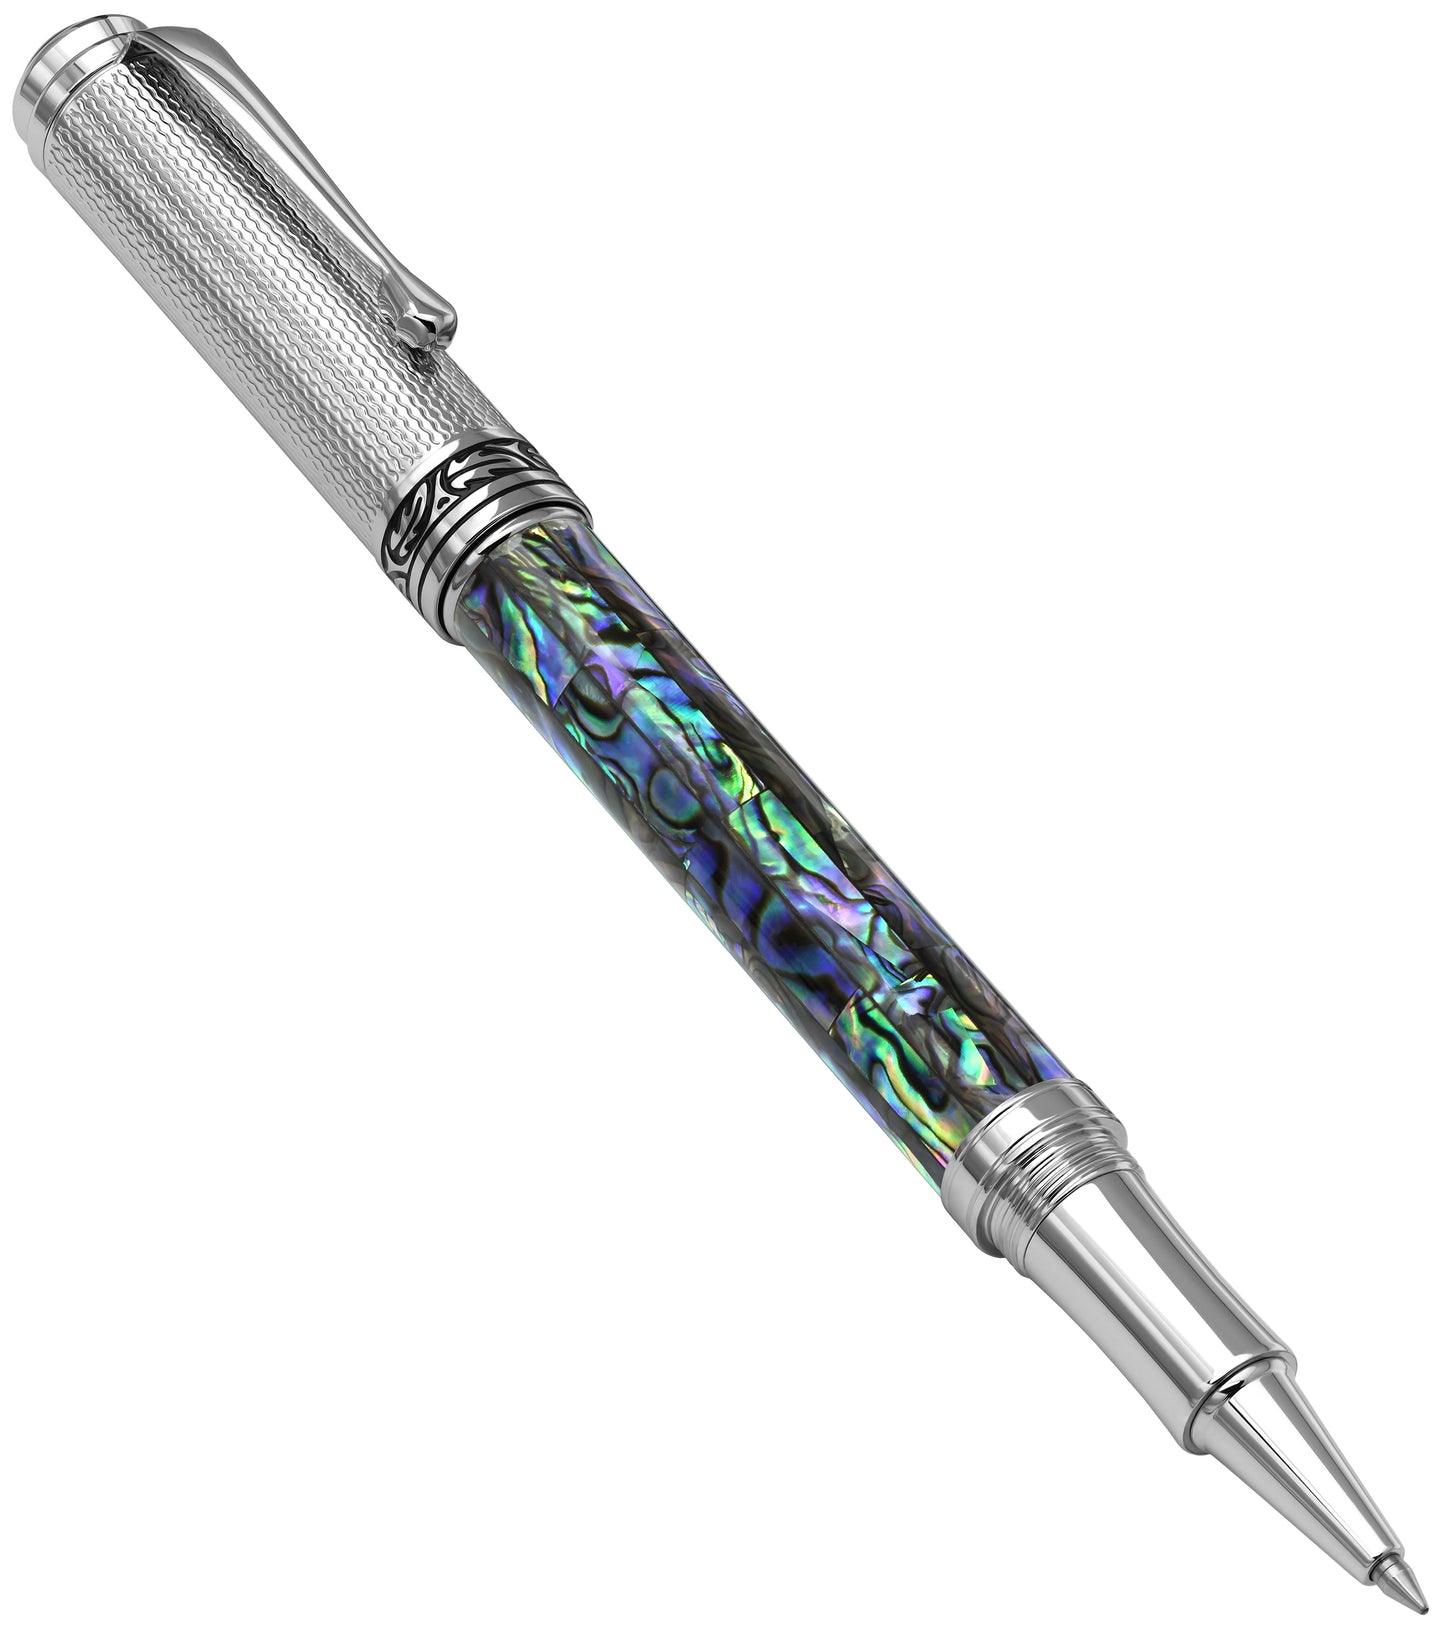 45 degrees angle view of the Maestro rollerball pen